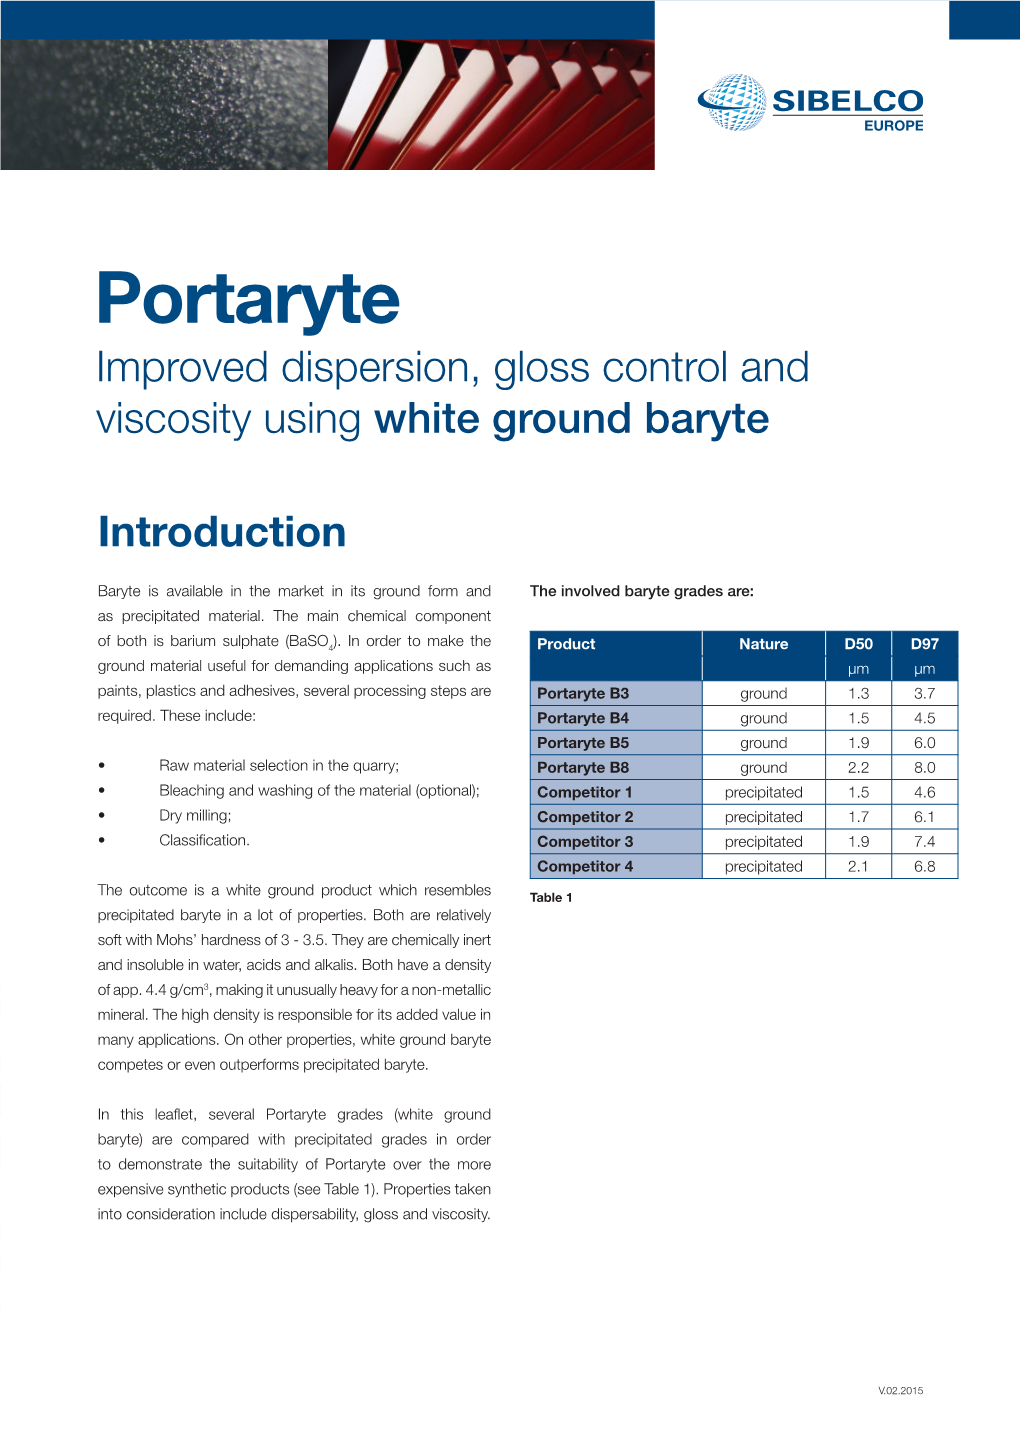 Portaryte Improved Dispersion, Gloss Control and Viscosity Using White Ground Baryte